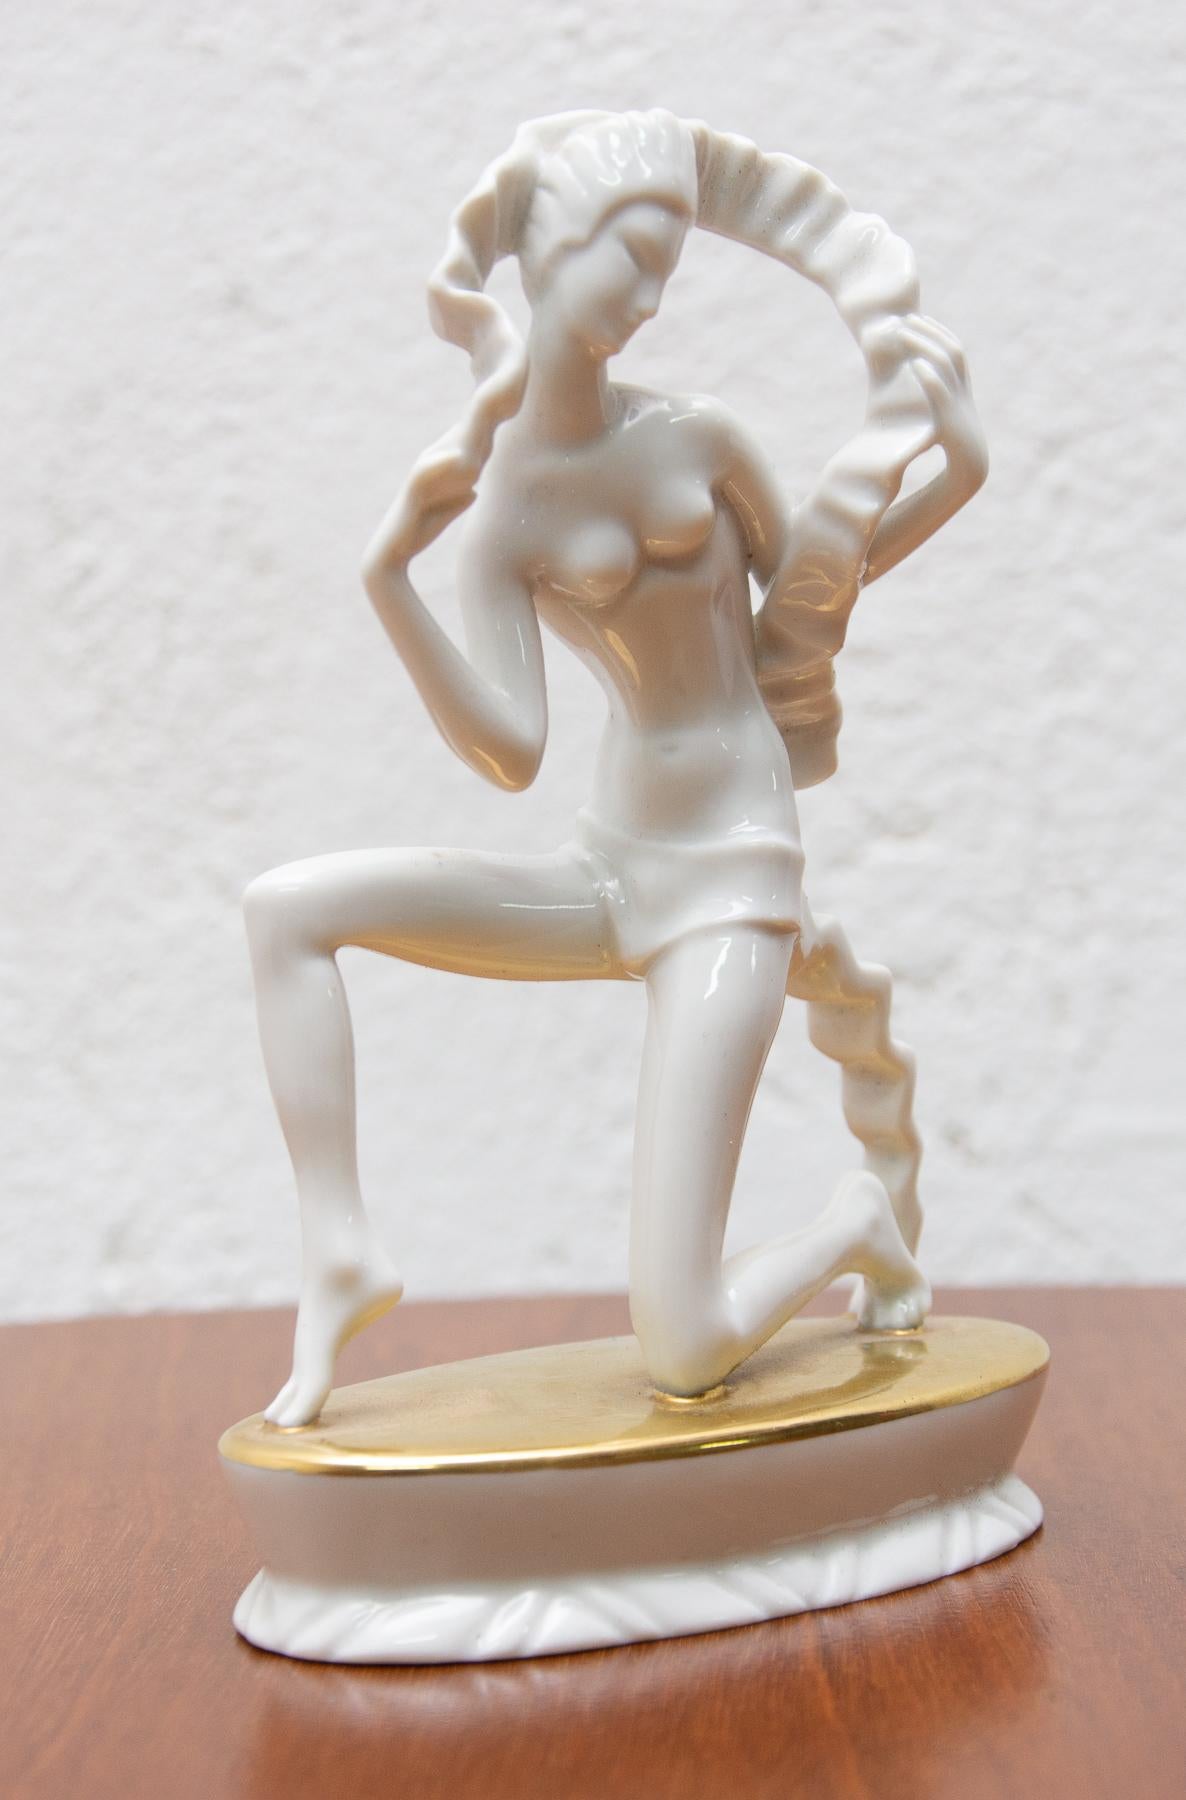 This rare sculpture was designed by Lothar Otto (1893-1970) and made by the world-famous Rosenthal porcelain factory in Germany. Depicts a naked kneeling girl - dancer. The statuette shows some abstraction elements. It is in excellent condition